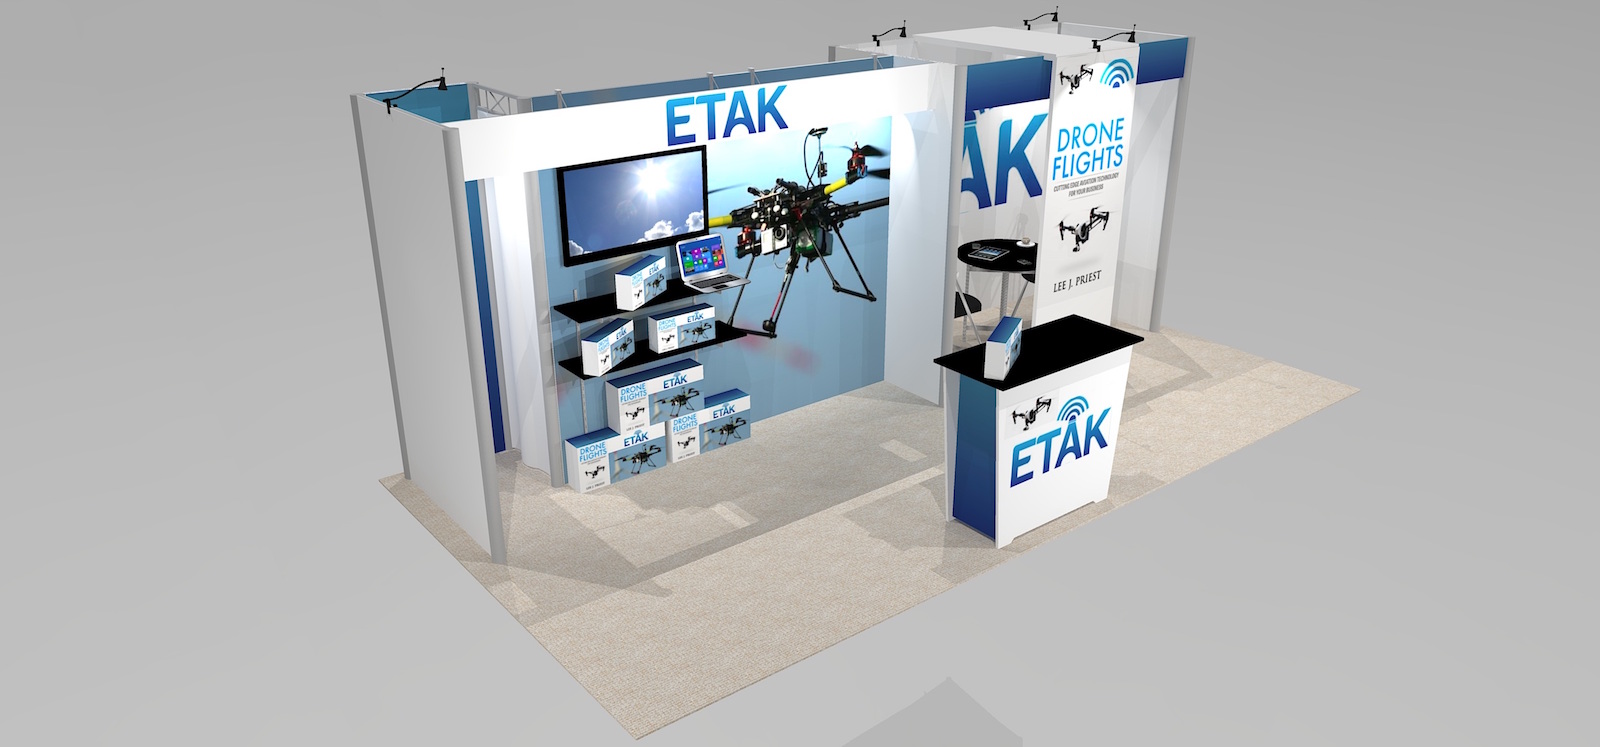 IM5_Trade-show-design-with-storage-meeting-space-product-display-and-large-trade-show-graphic-area-view-2